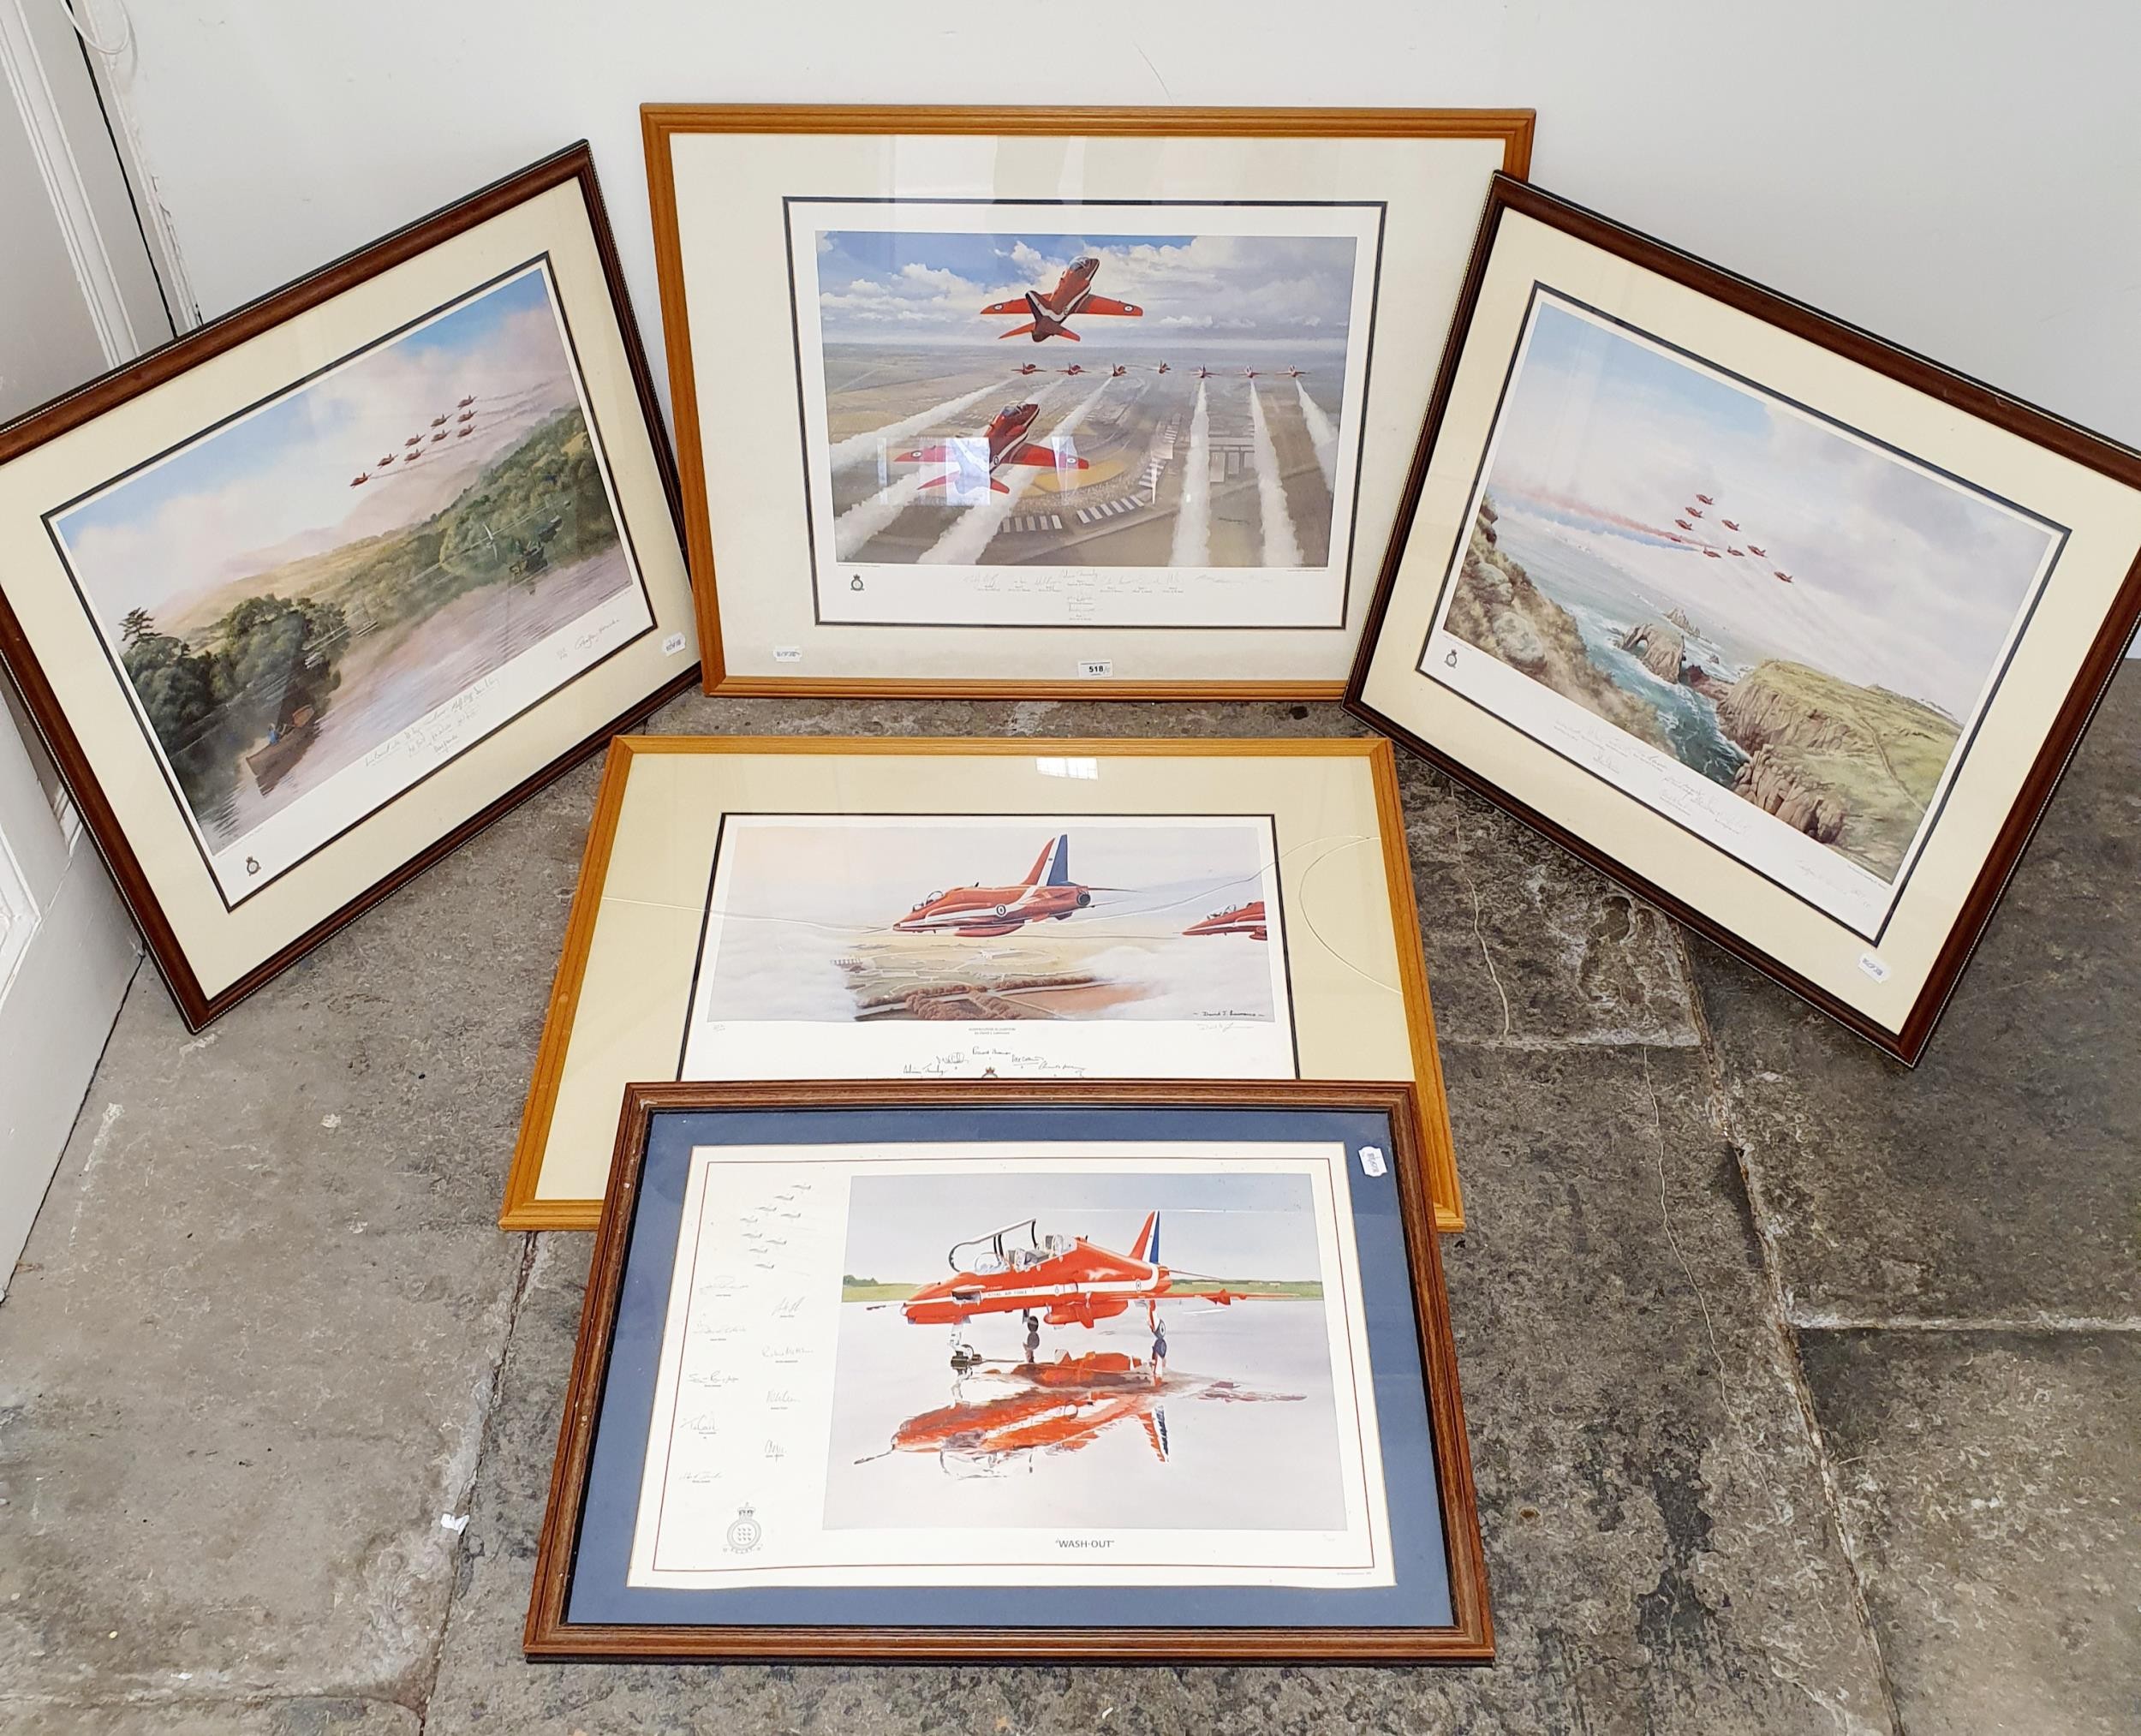 Geoffrey Herickx, limited edition prints of the Red Arrows, 562/850, signed by the pilots, 42 x 54